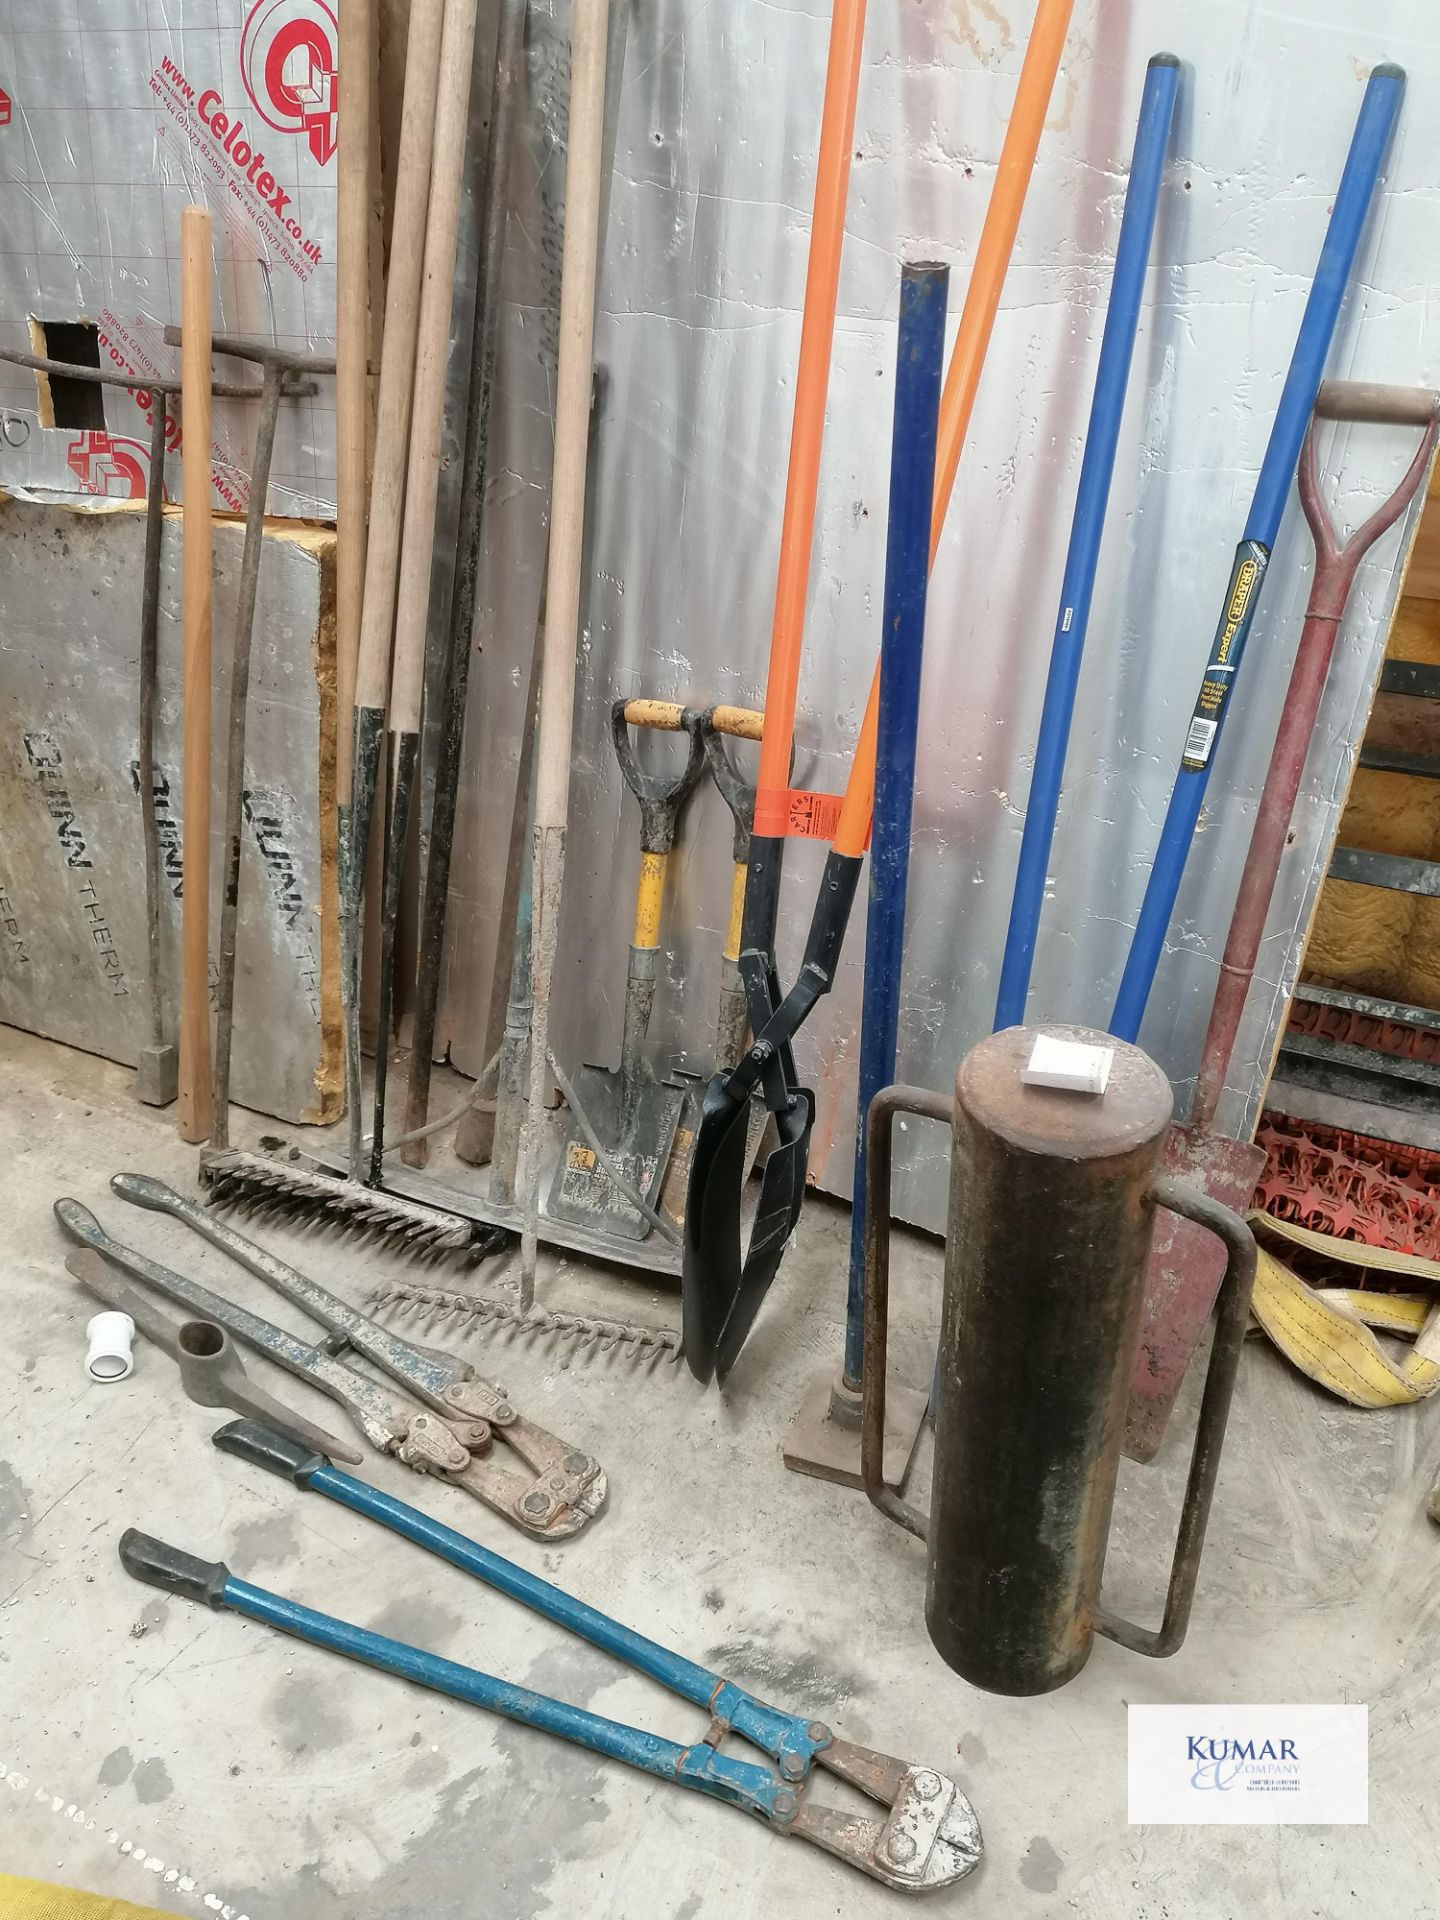 Large selection of hand tools and implements including , Post Knocker , Post hole digger , Small